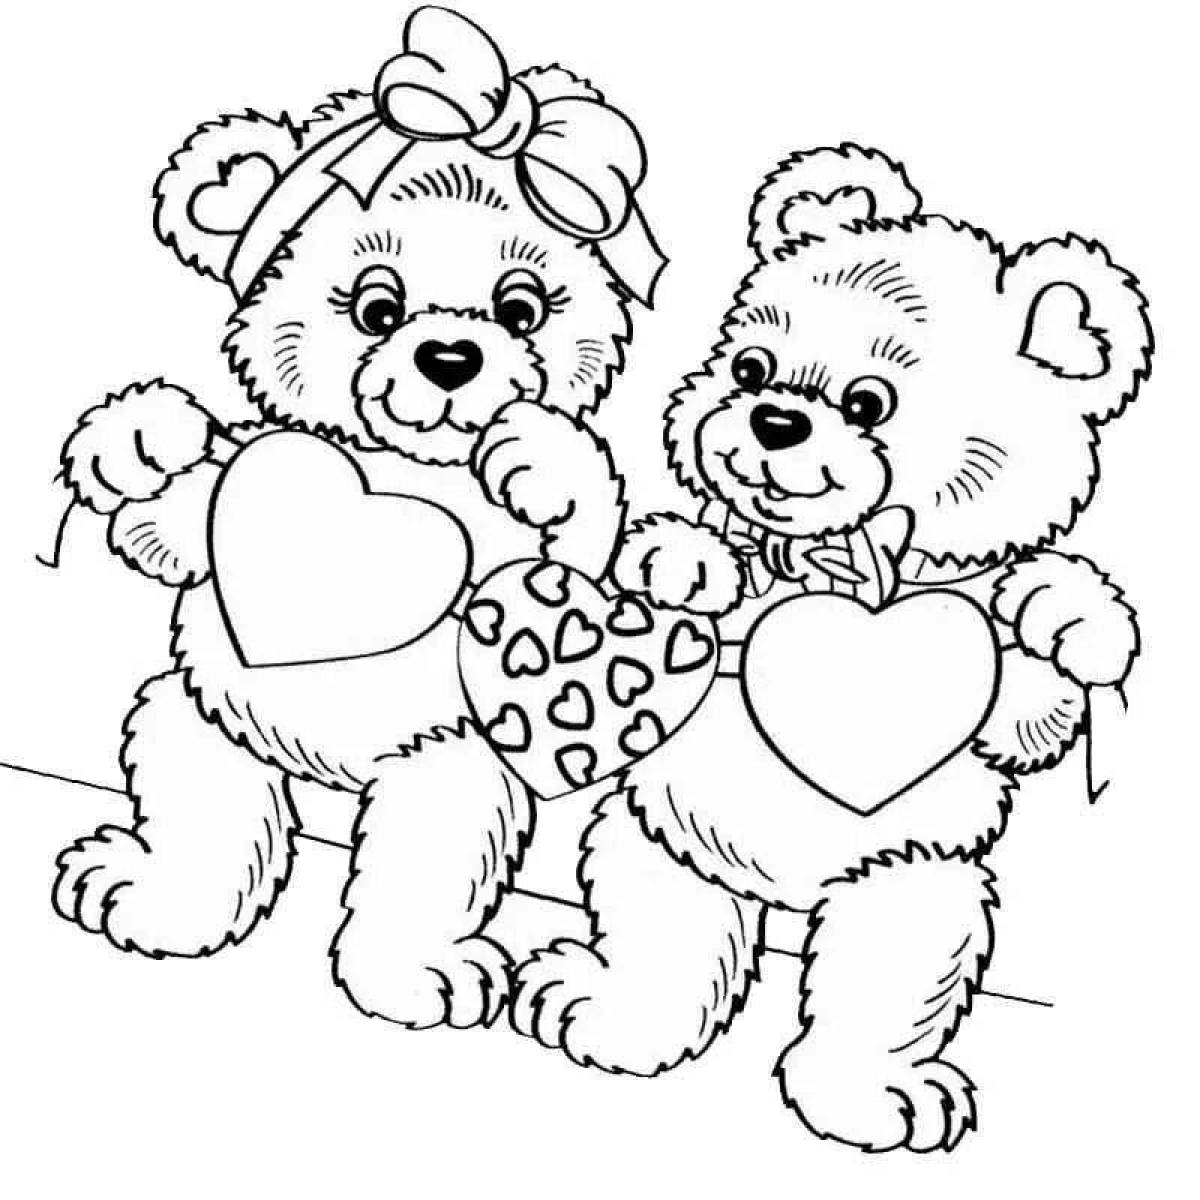 Favorite teddy bear with heart coloring book